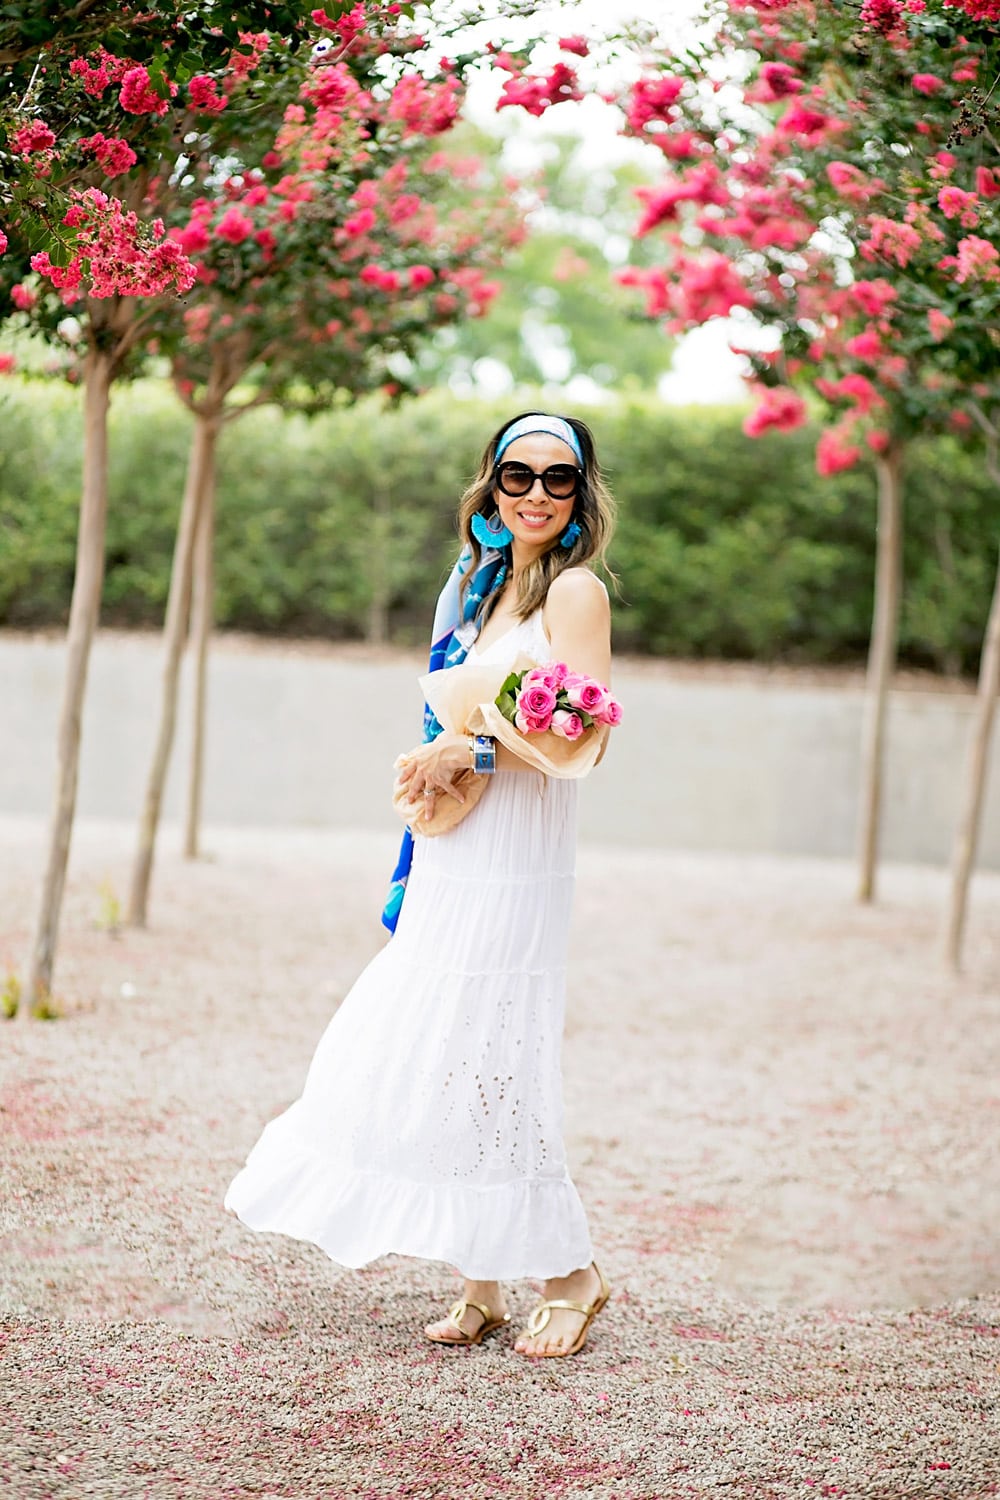 hermes les cles maxi twilly head scarf white eyelet maxi dress figue gypsy turquoise earrings prada baroque sunglasses santorini inspired vacation outfit